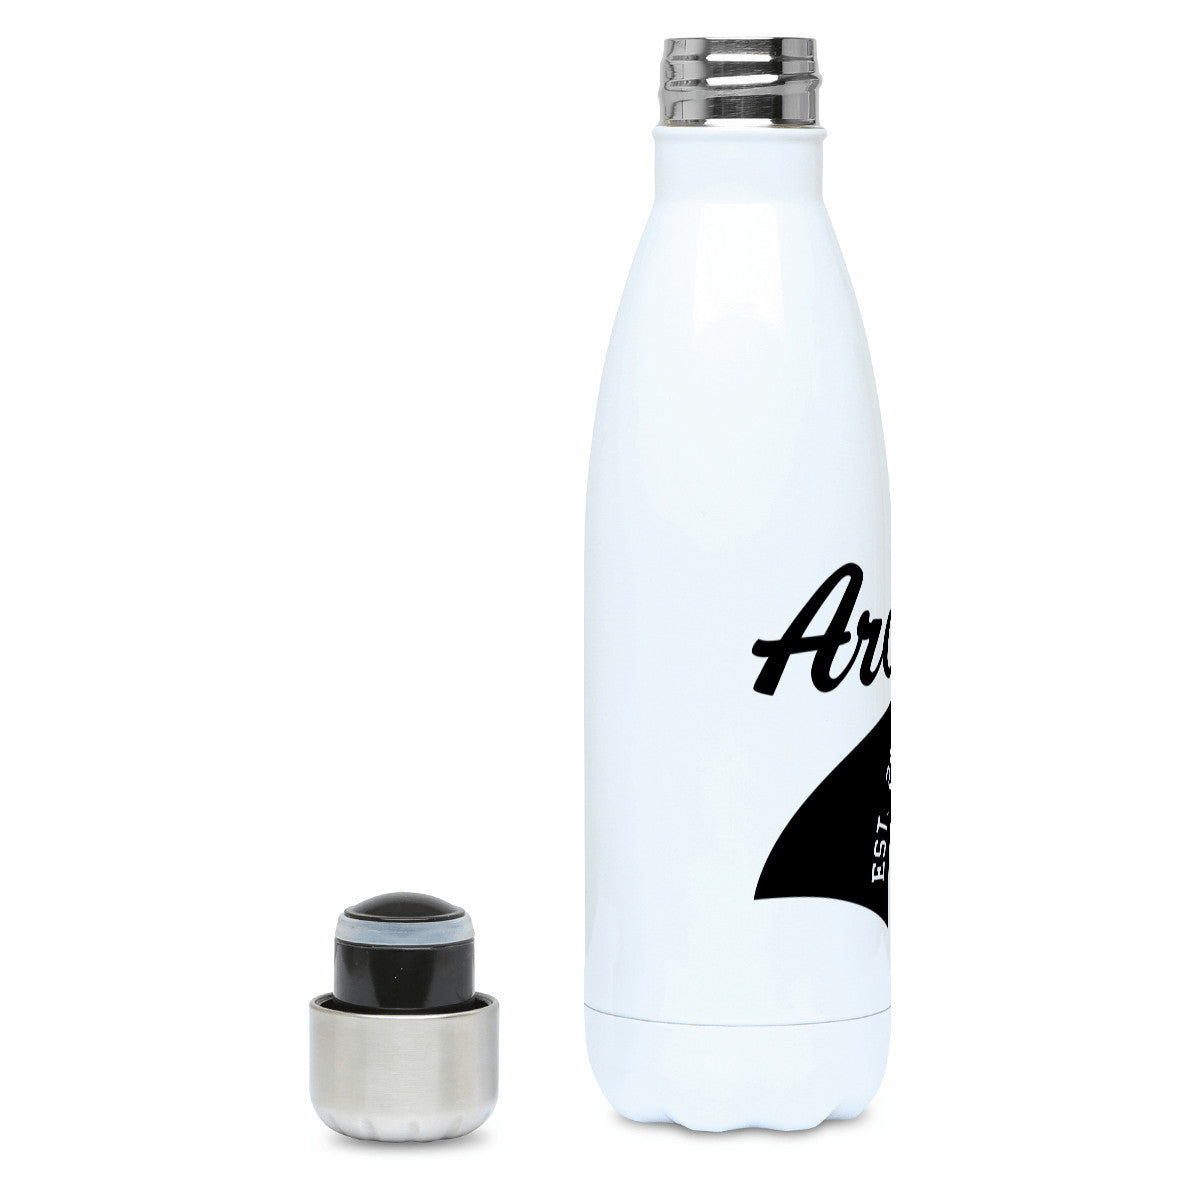 Athletic name and year swish design in black on a white metal insulated drinks bottle, lid off